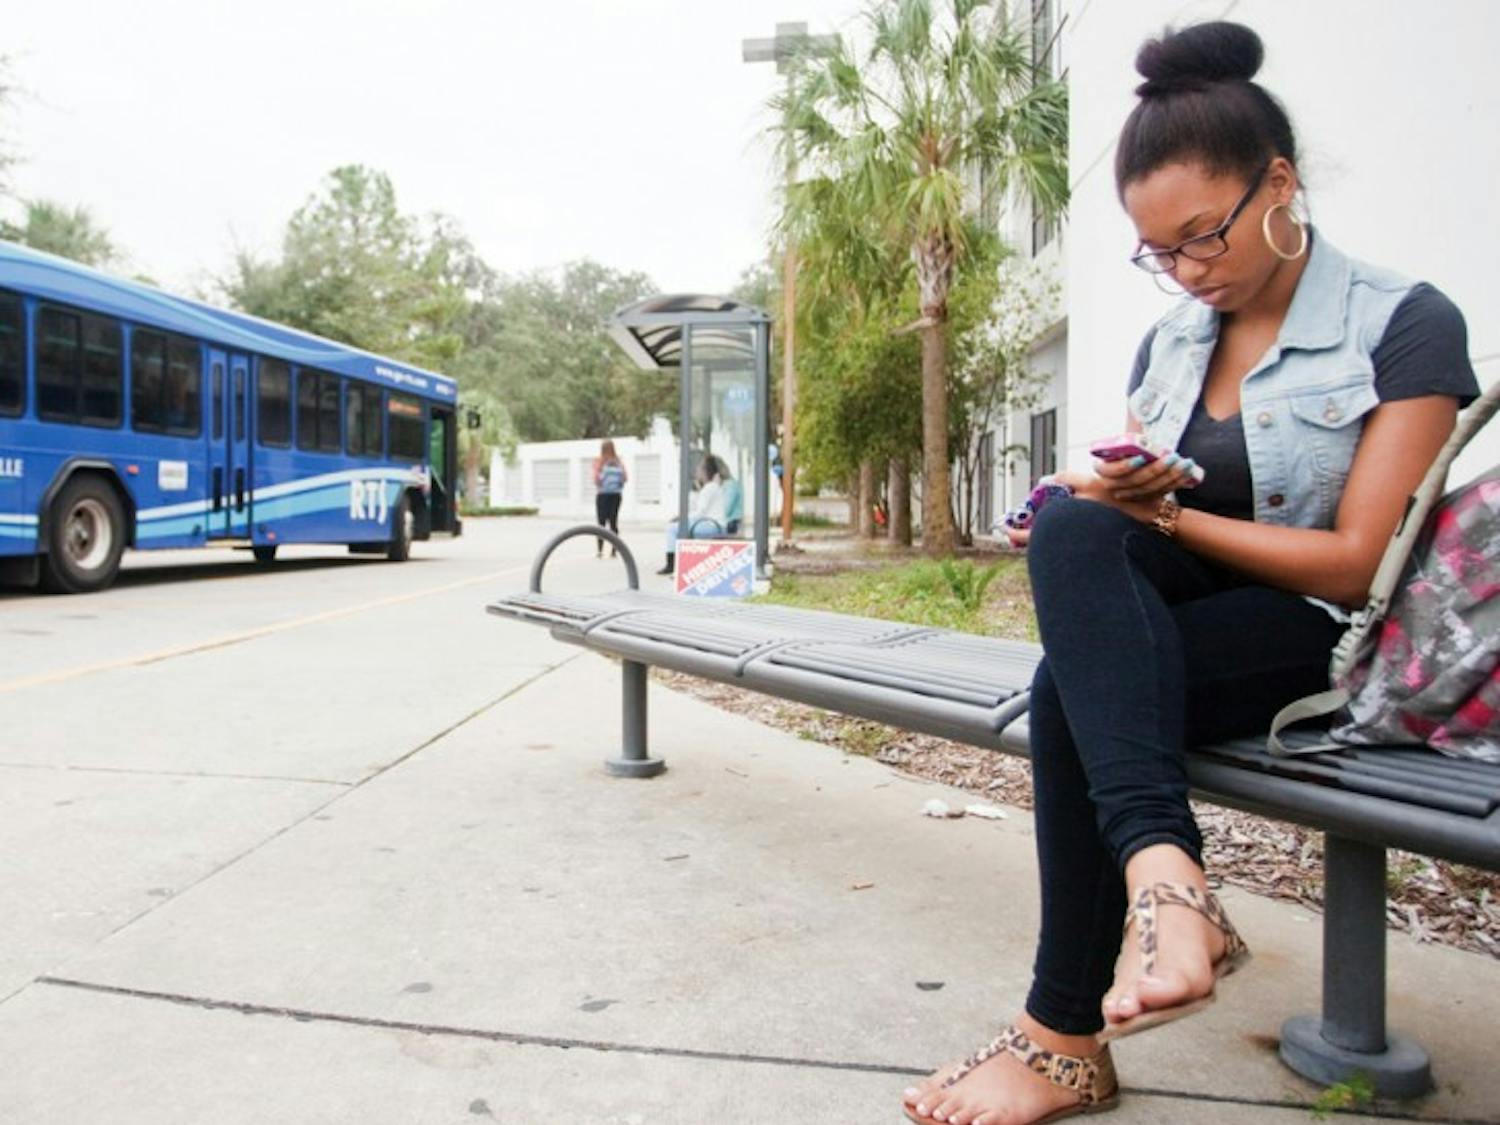 Whitney Jeter, a 19-year-old health sciences sophomore, waits to take the No. 23 bus home after her Marriage and Family class at Sante Fe College on Tuesday afternoon.